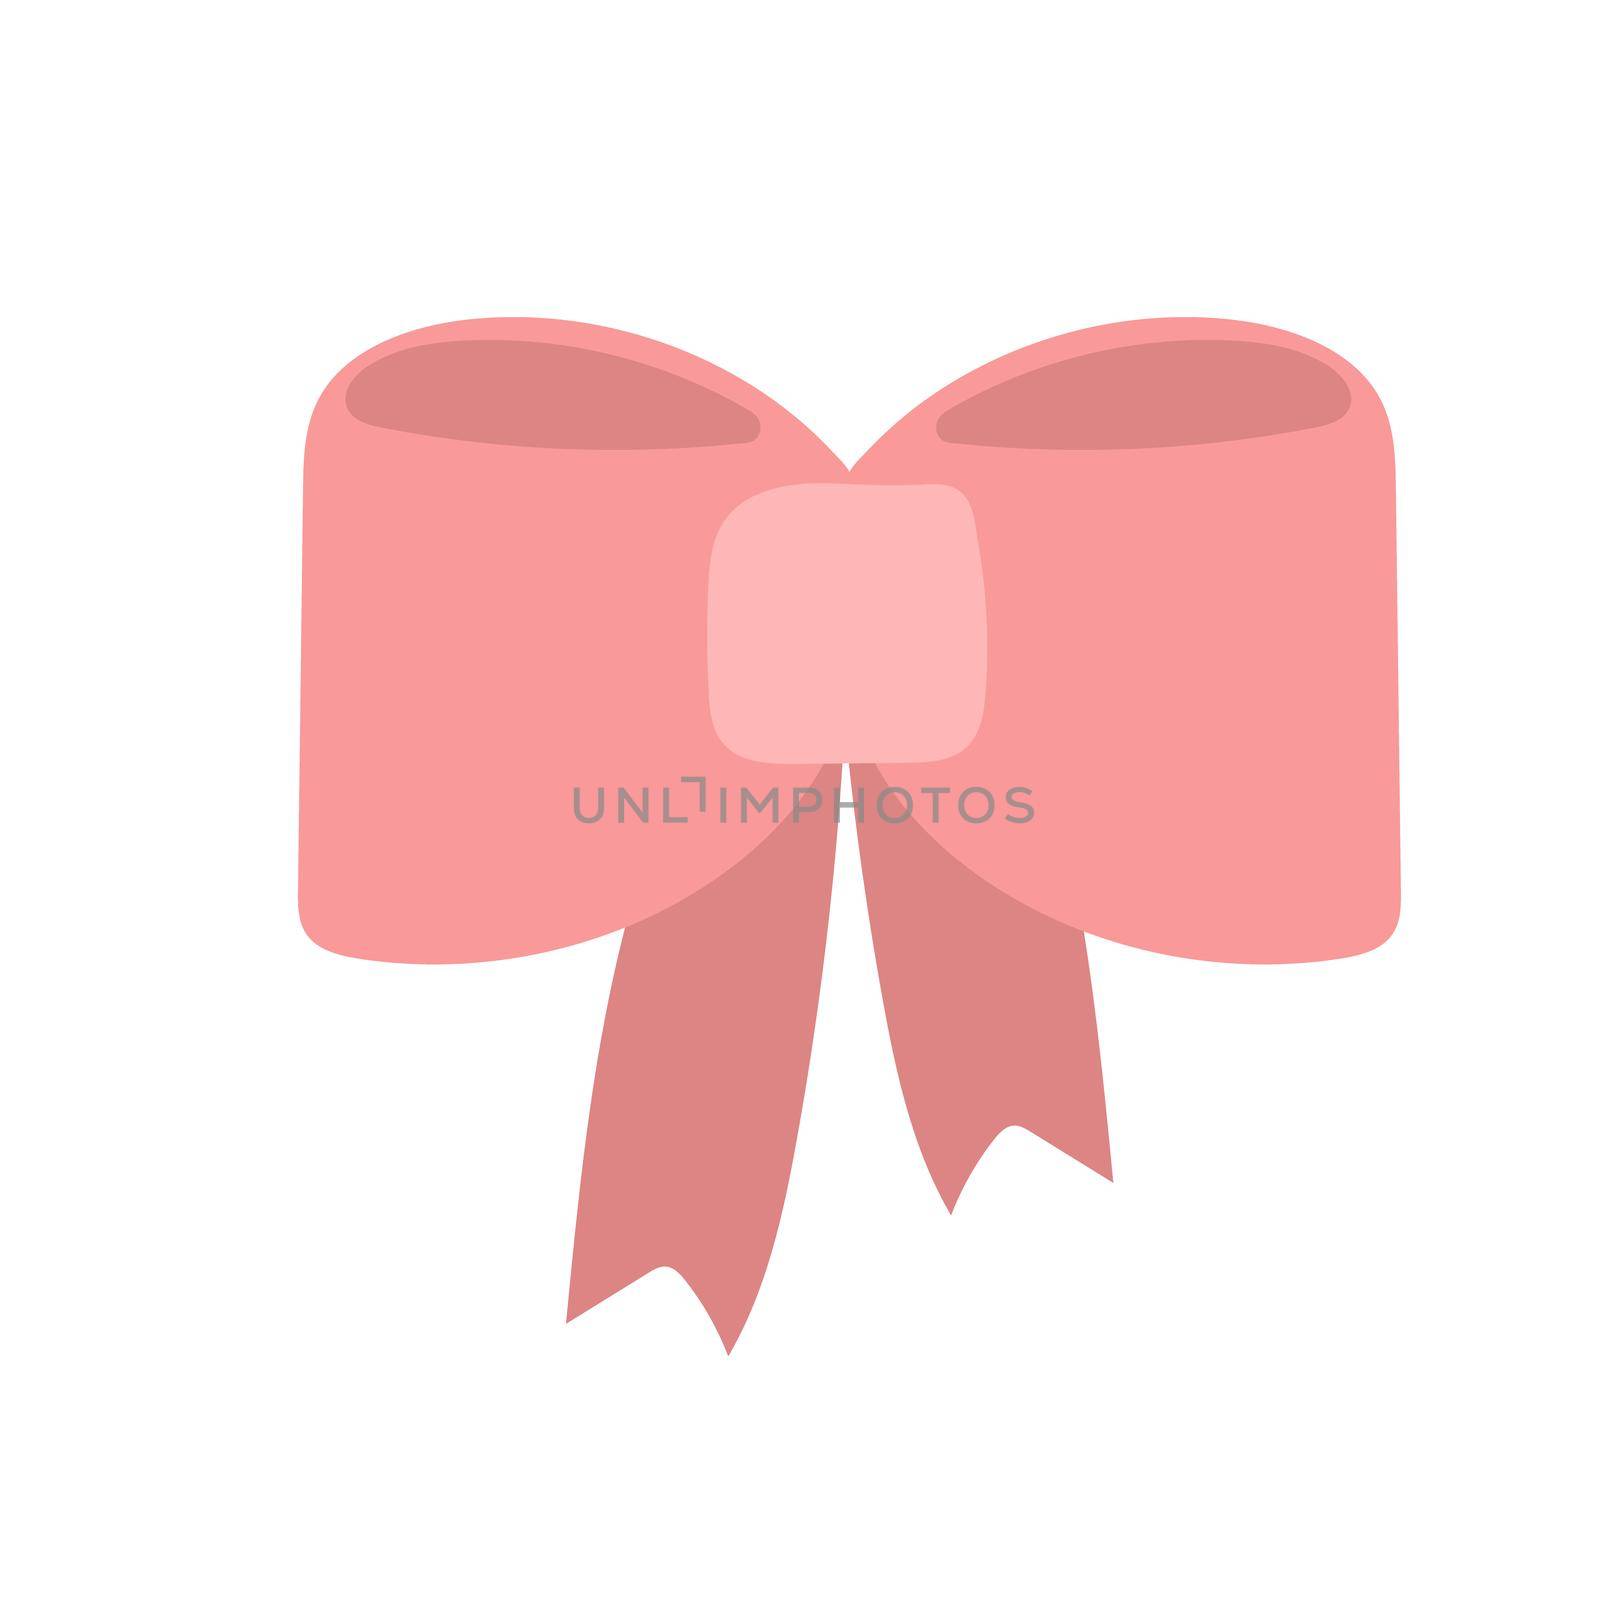 Red bow. Doodle vector illustration. Simple hand drawn icon on white for design